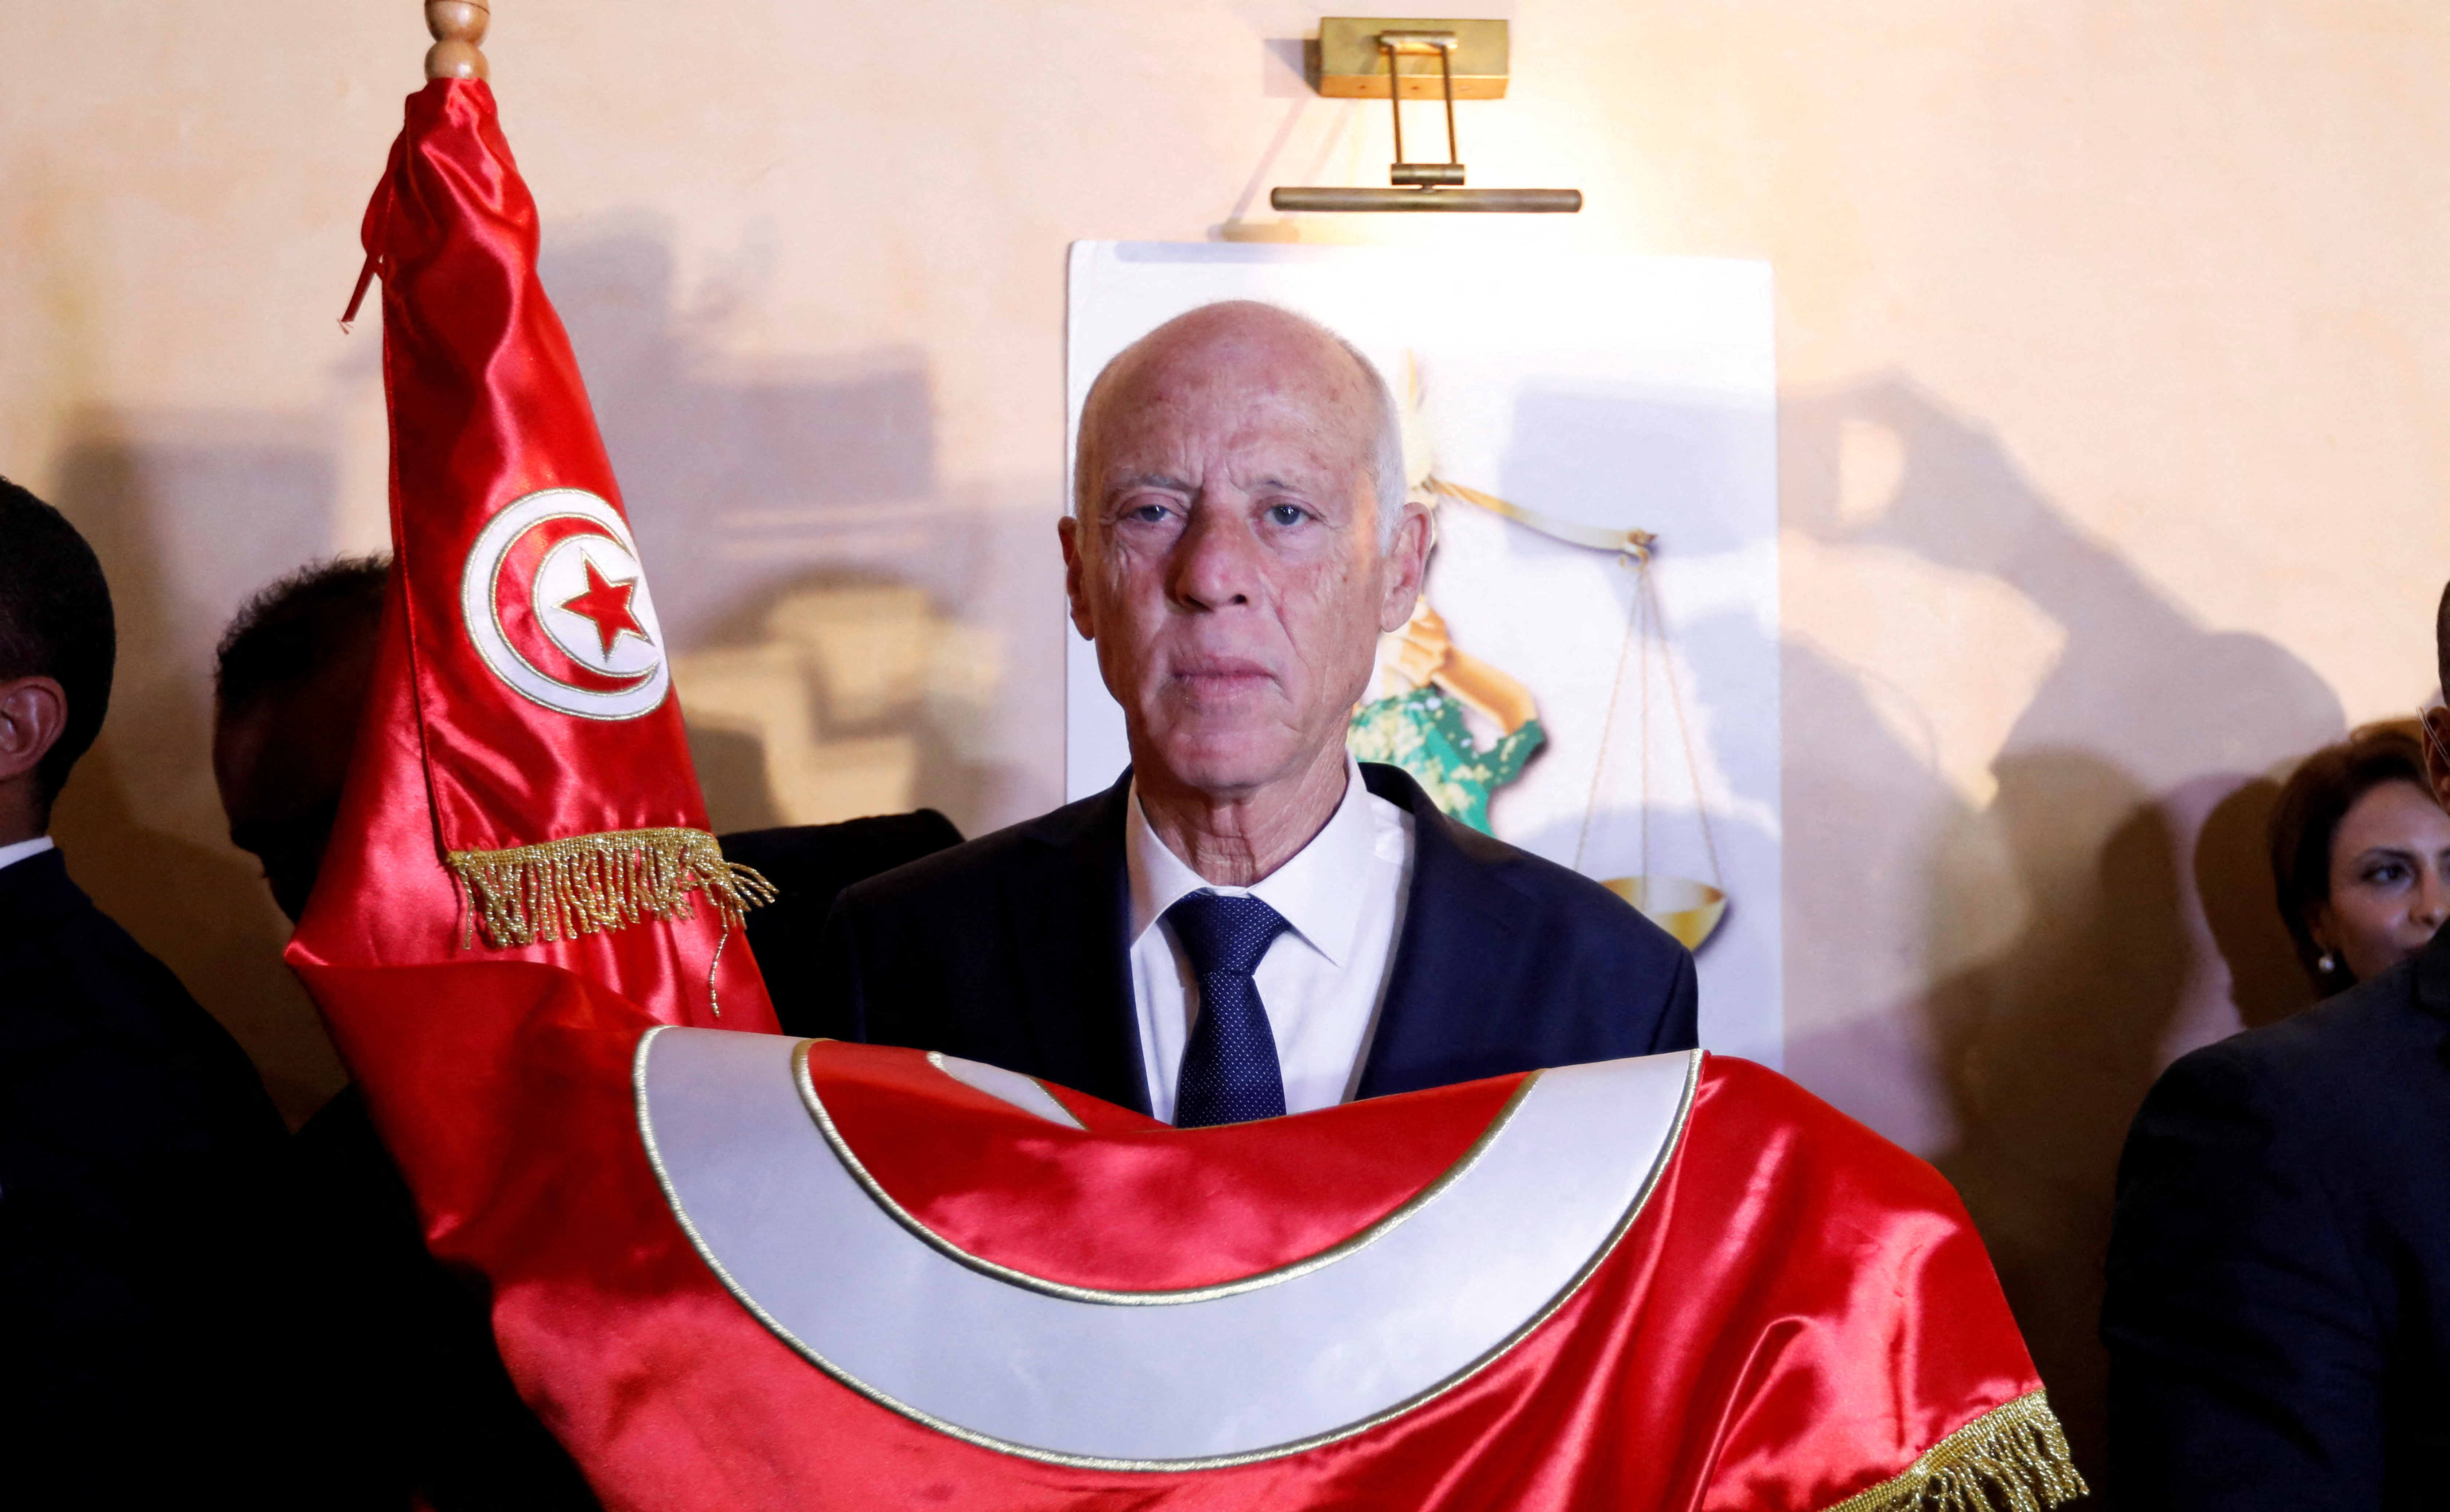 Tunisian then-presidential candidate Kais Saied reacts after exit poll results were announced in a second round runoff of the presidential election in Tunis